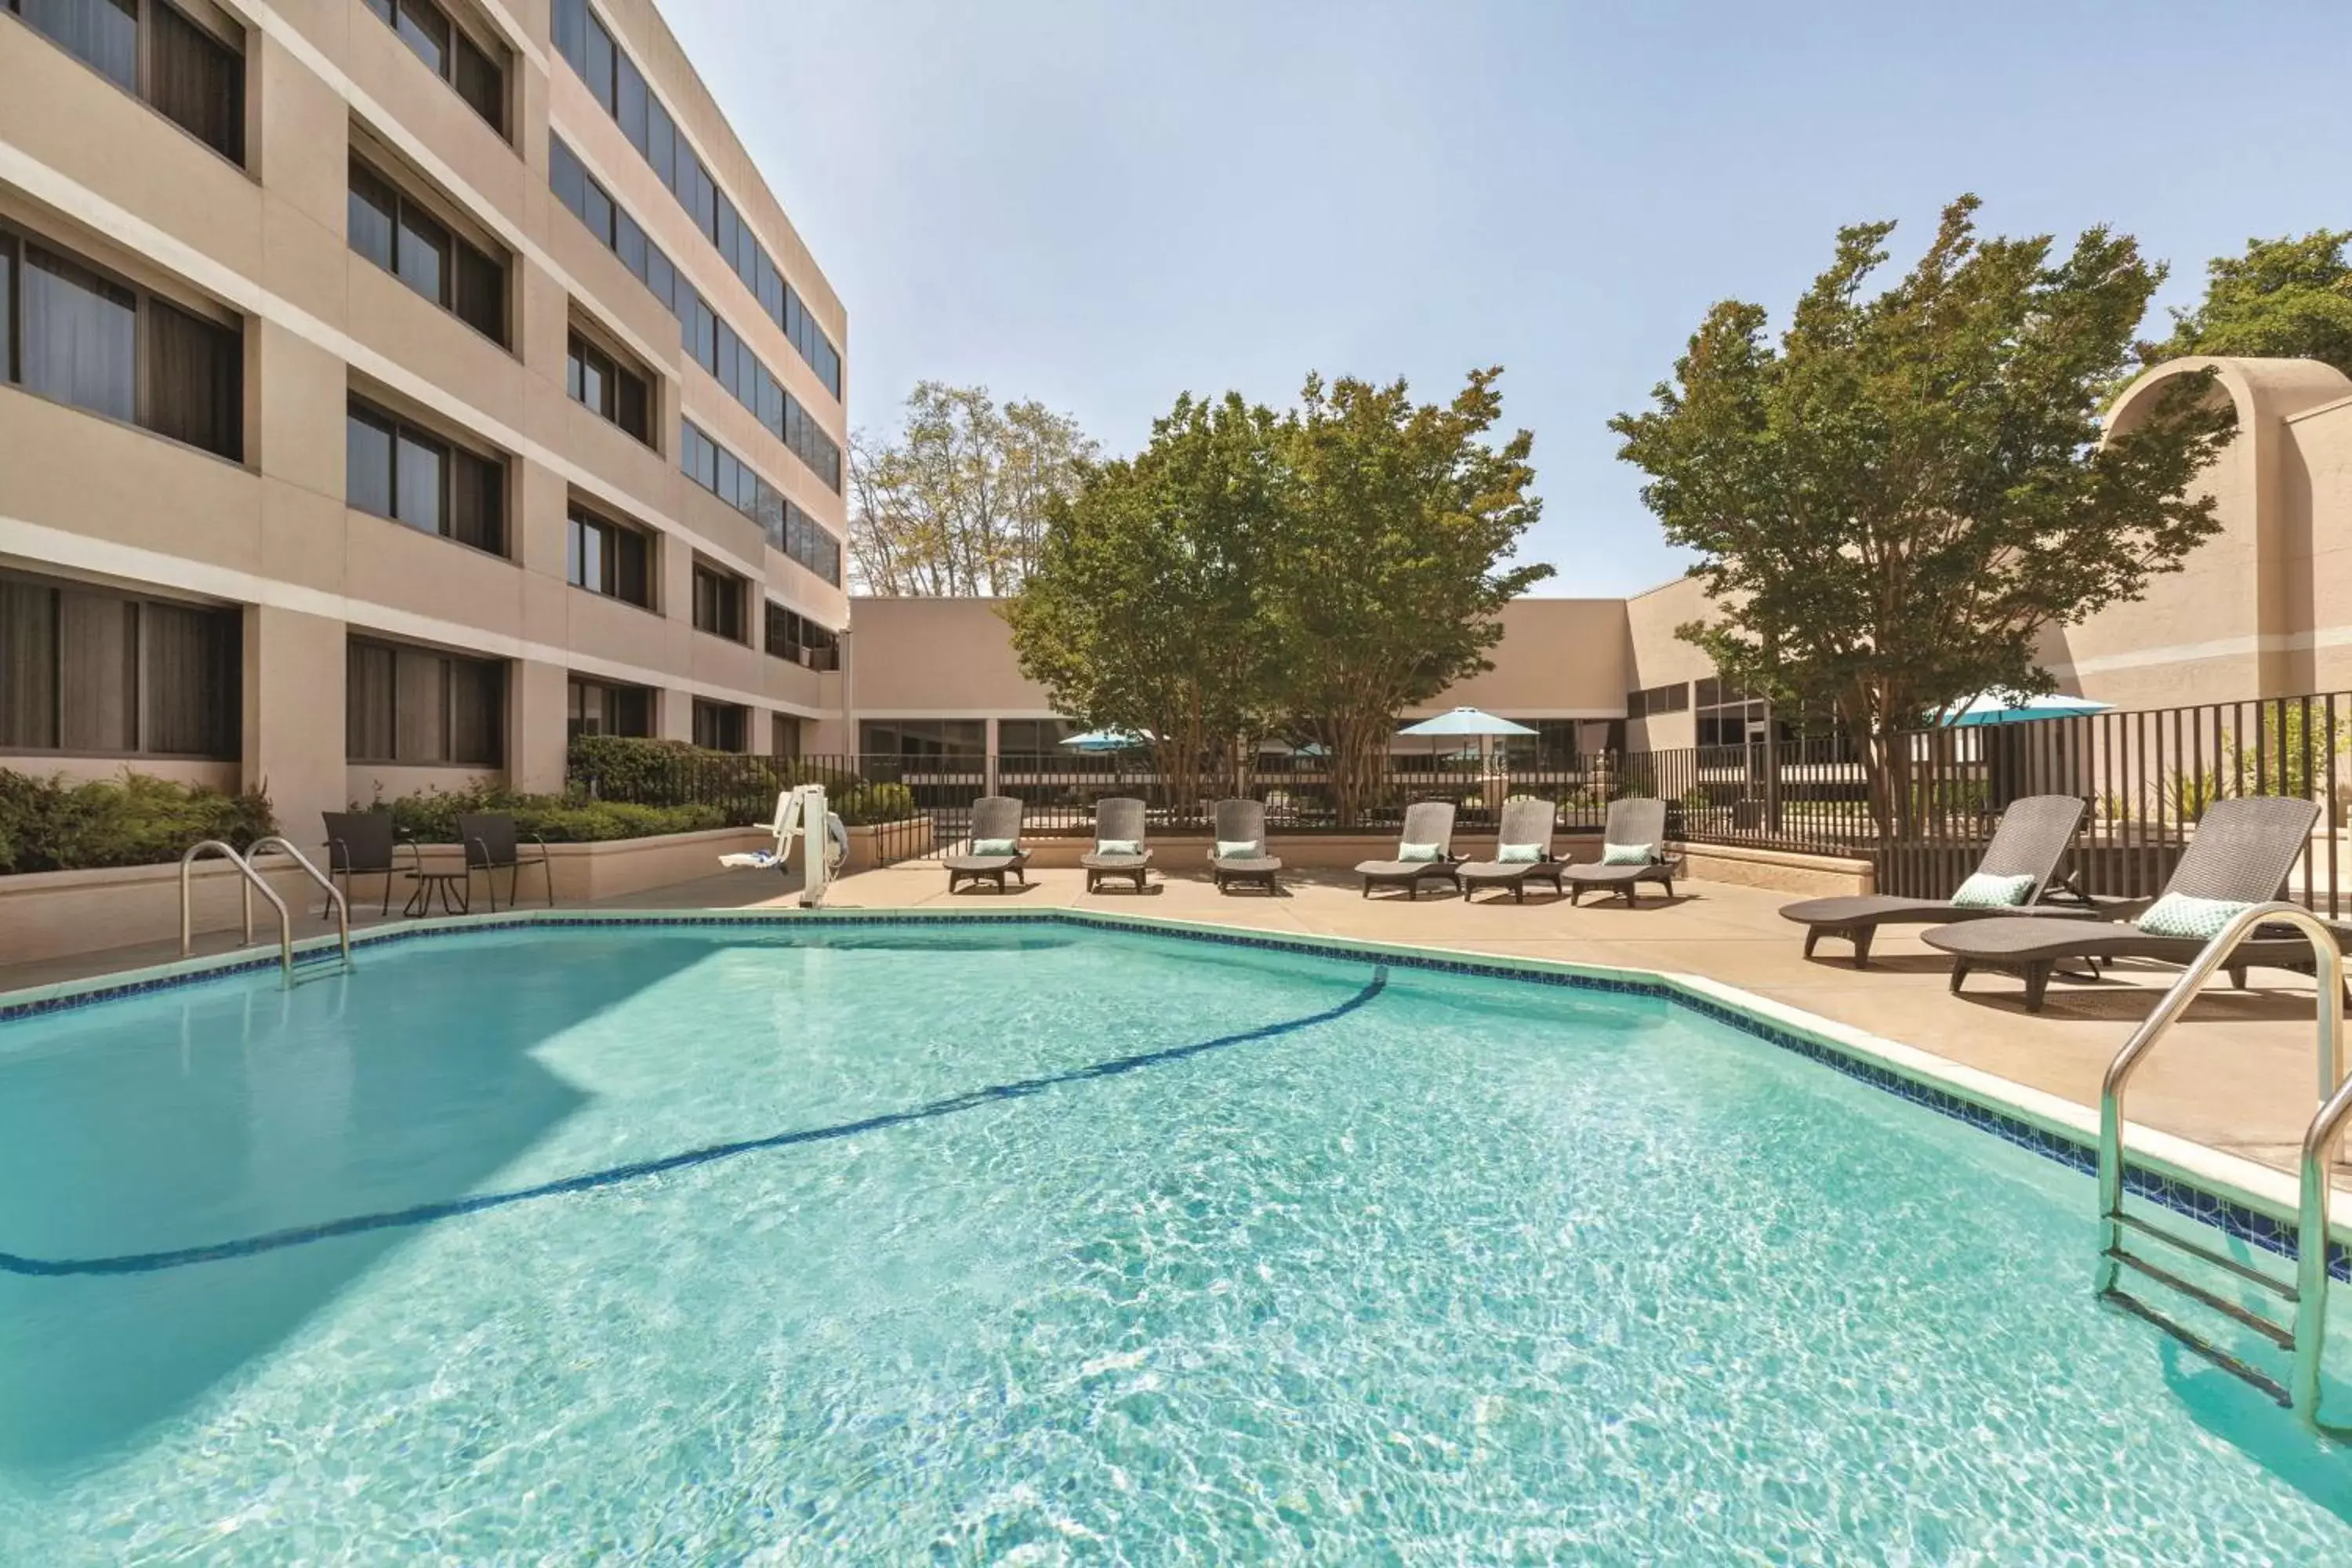 Activities, Swimming Pool in Radisson Hotel Sunnyvale - Silicon Valley